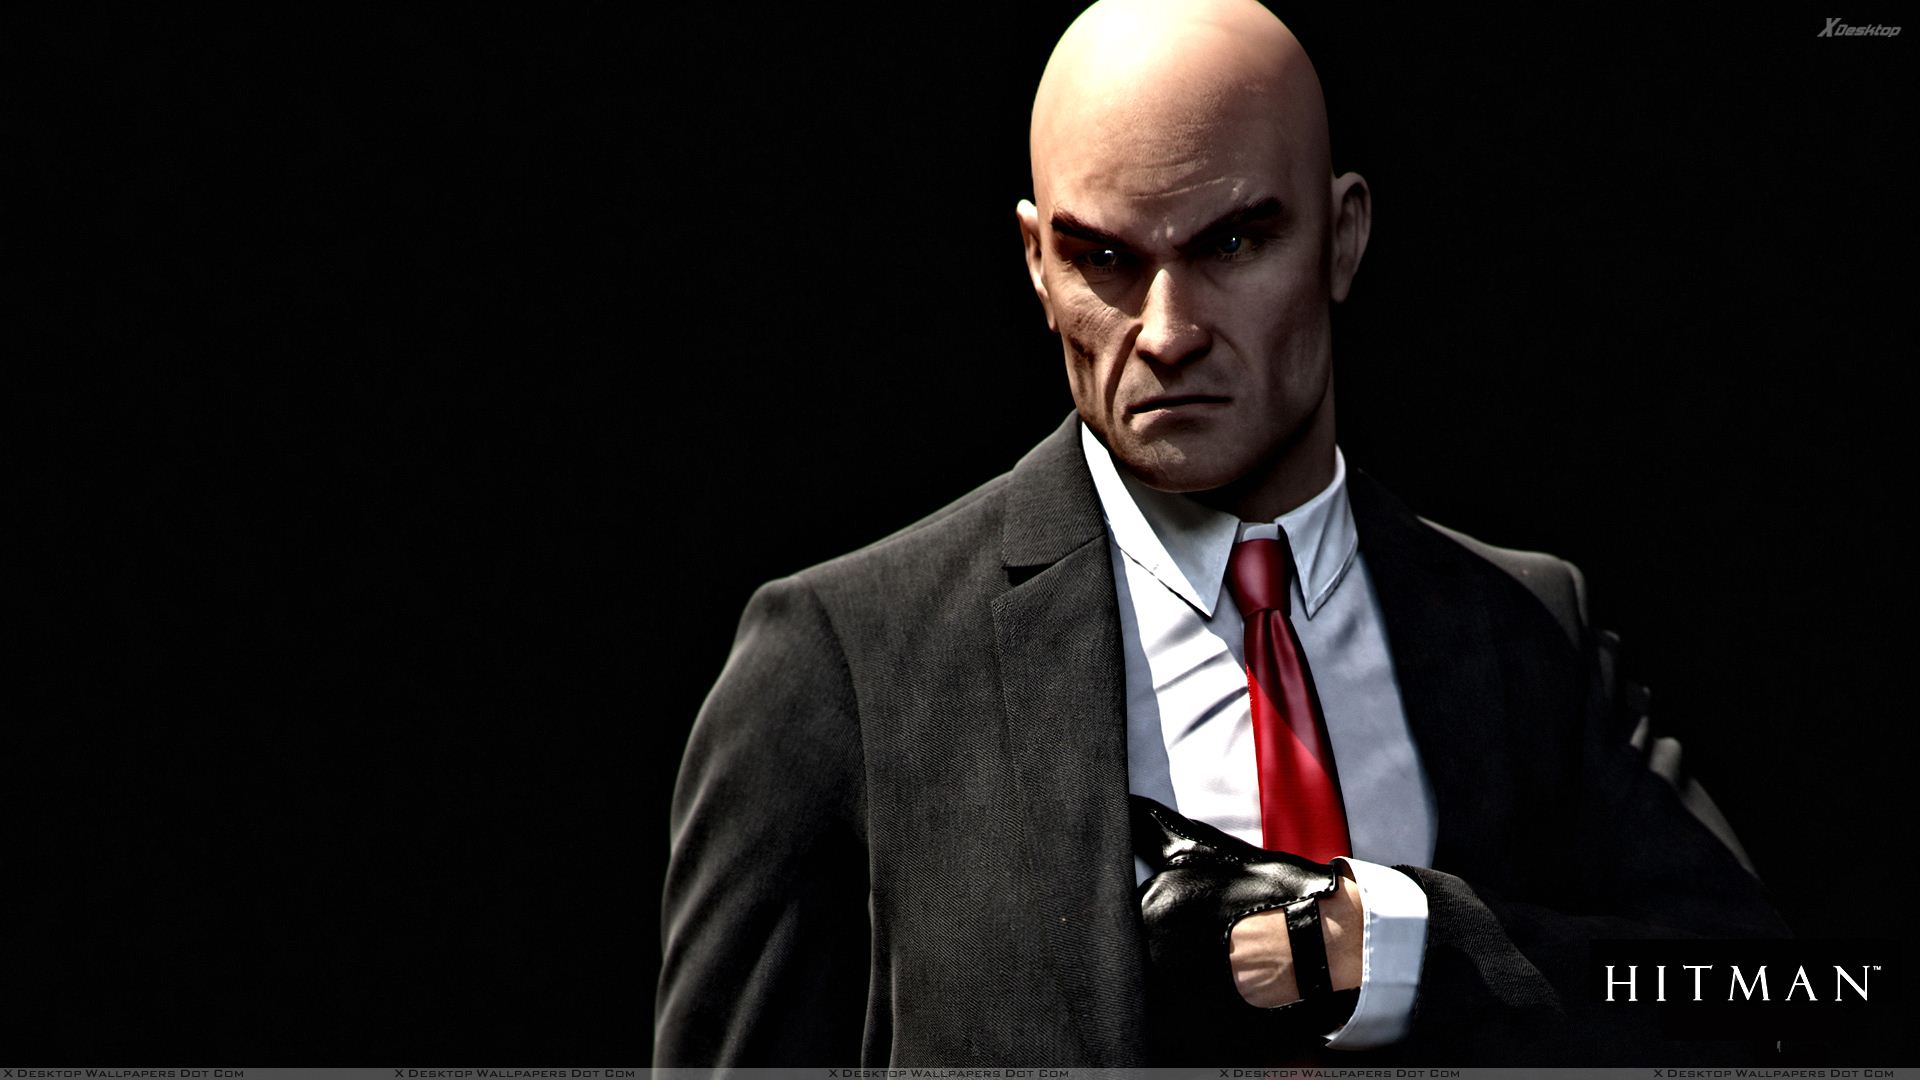 Hitman Absolution Pulling The Gun Out Wallpaper